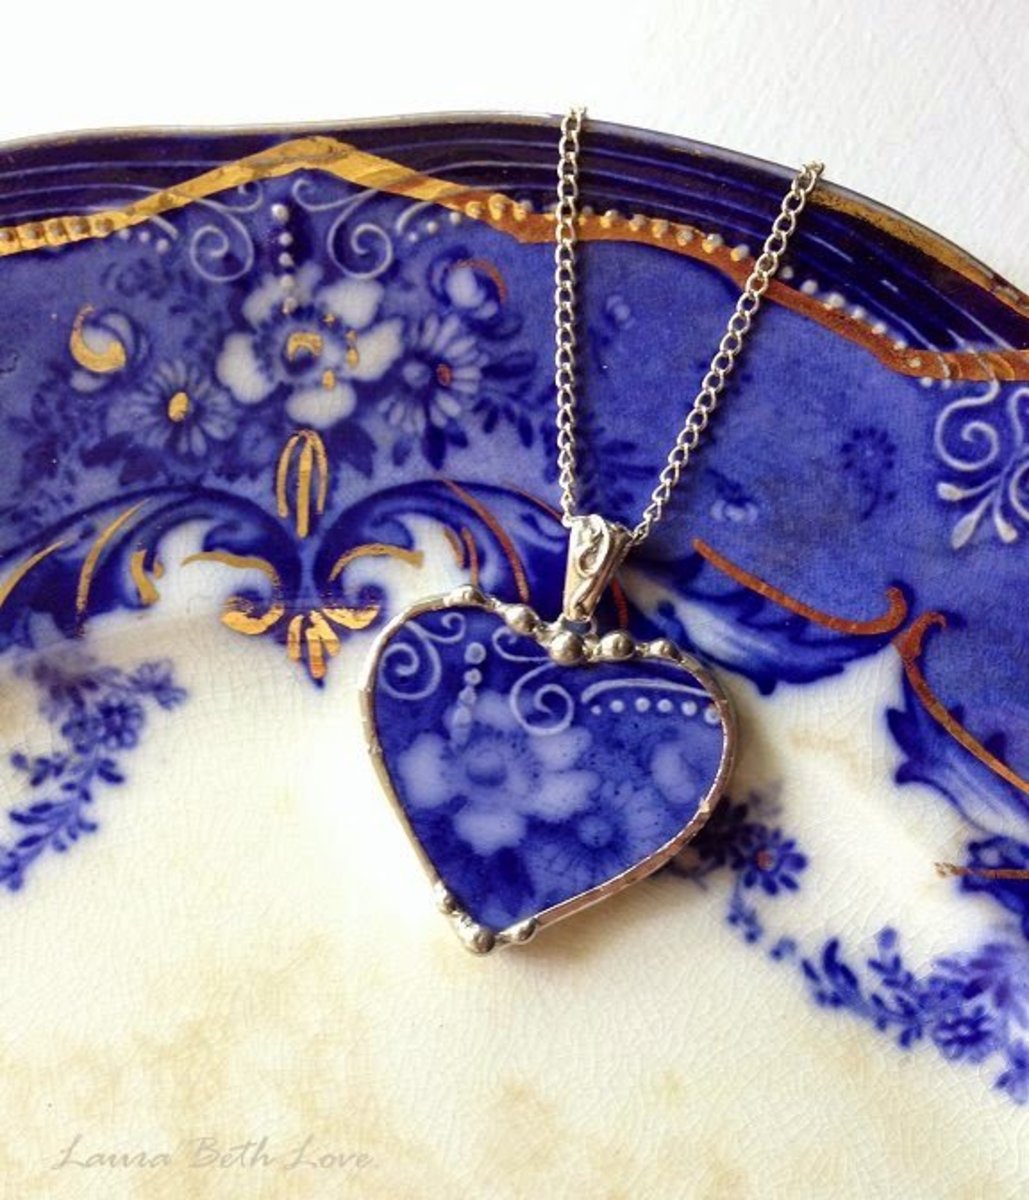 A heart-shaped pendant from a piece of flow blue pottery.